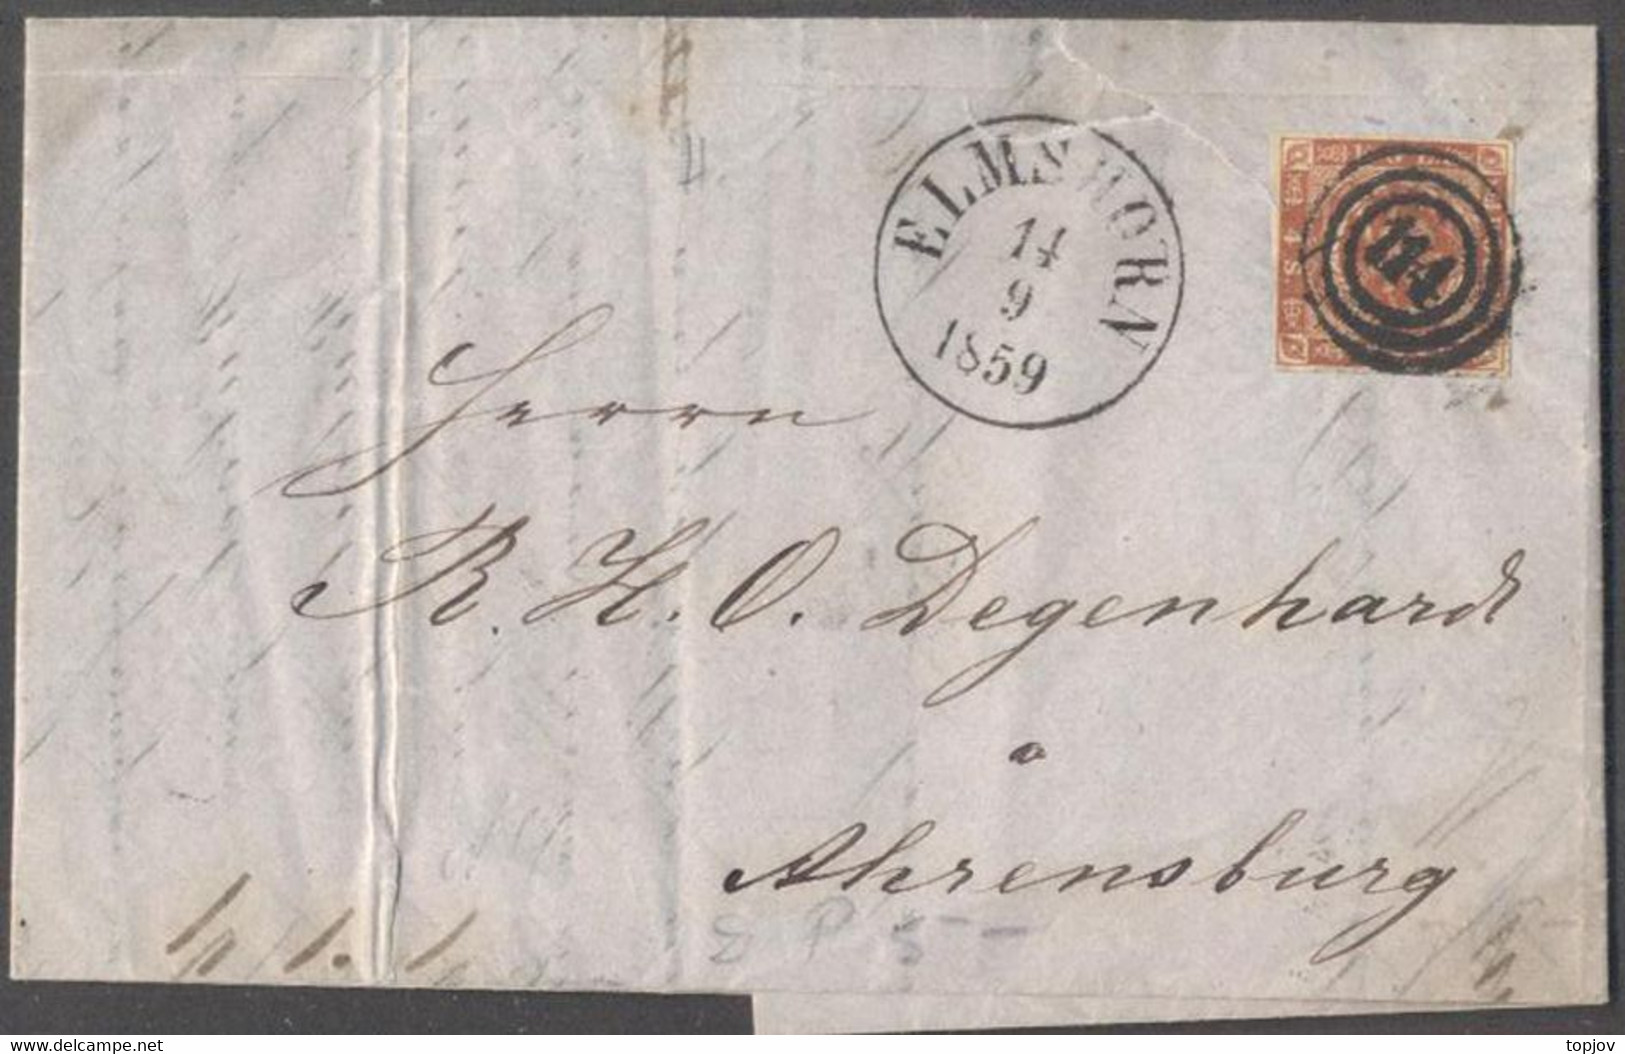 DENMARK - 4 S. ELMSHORN To AHRENSBURG GERMANY  Complet. Letter - 1859 - Covers & Documents